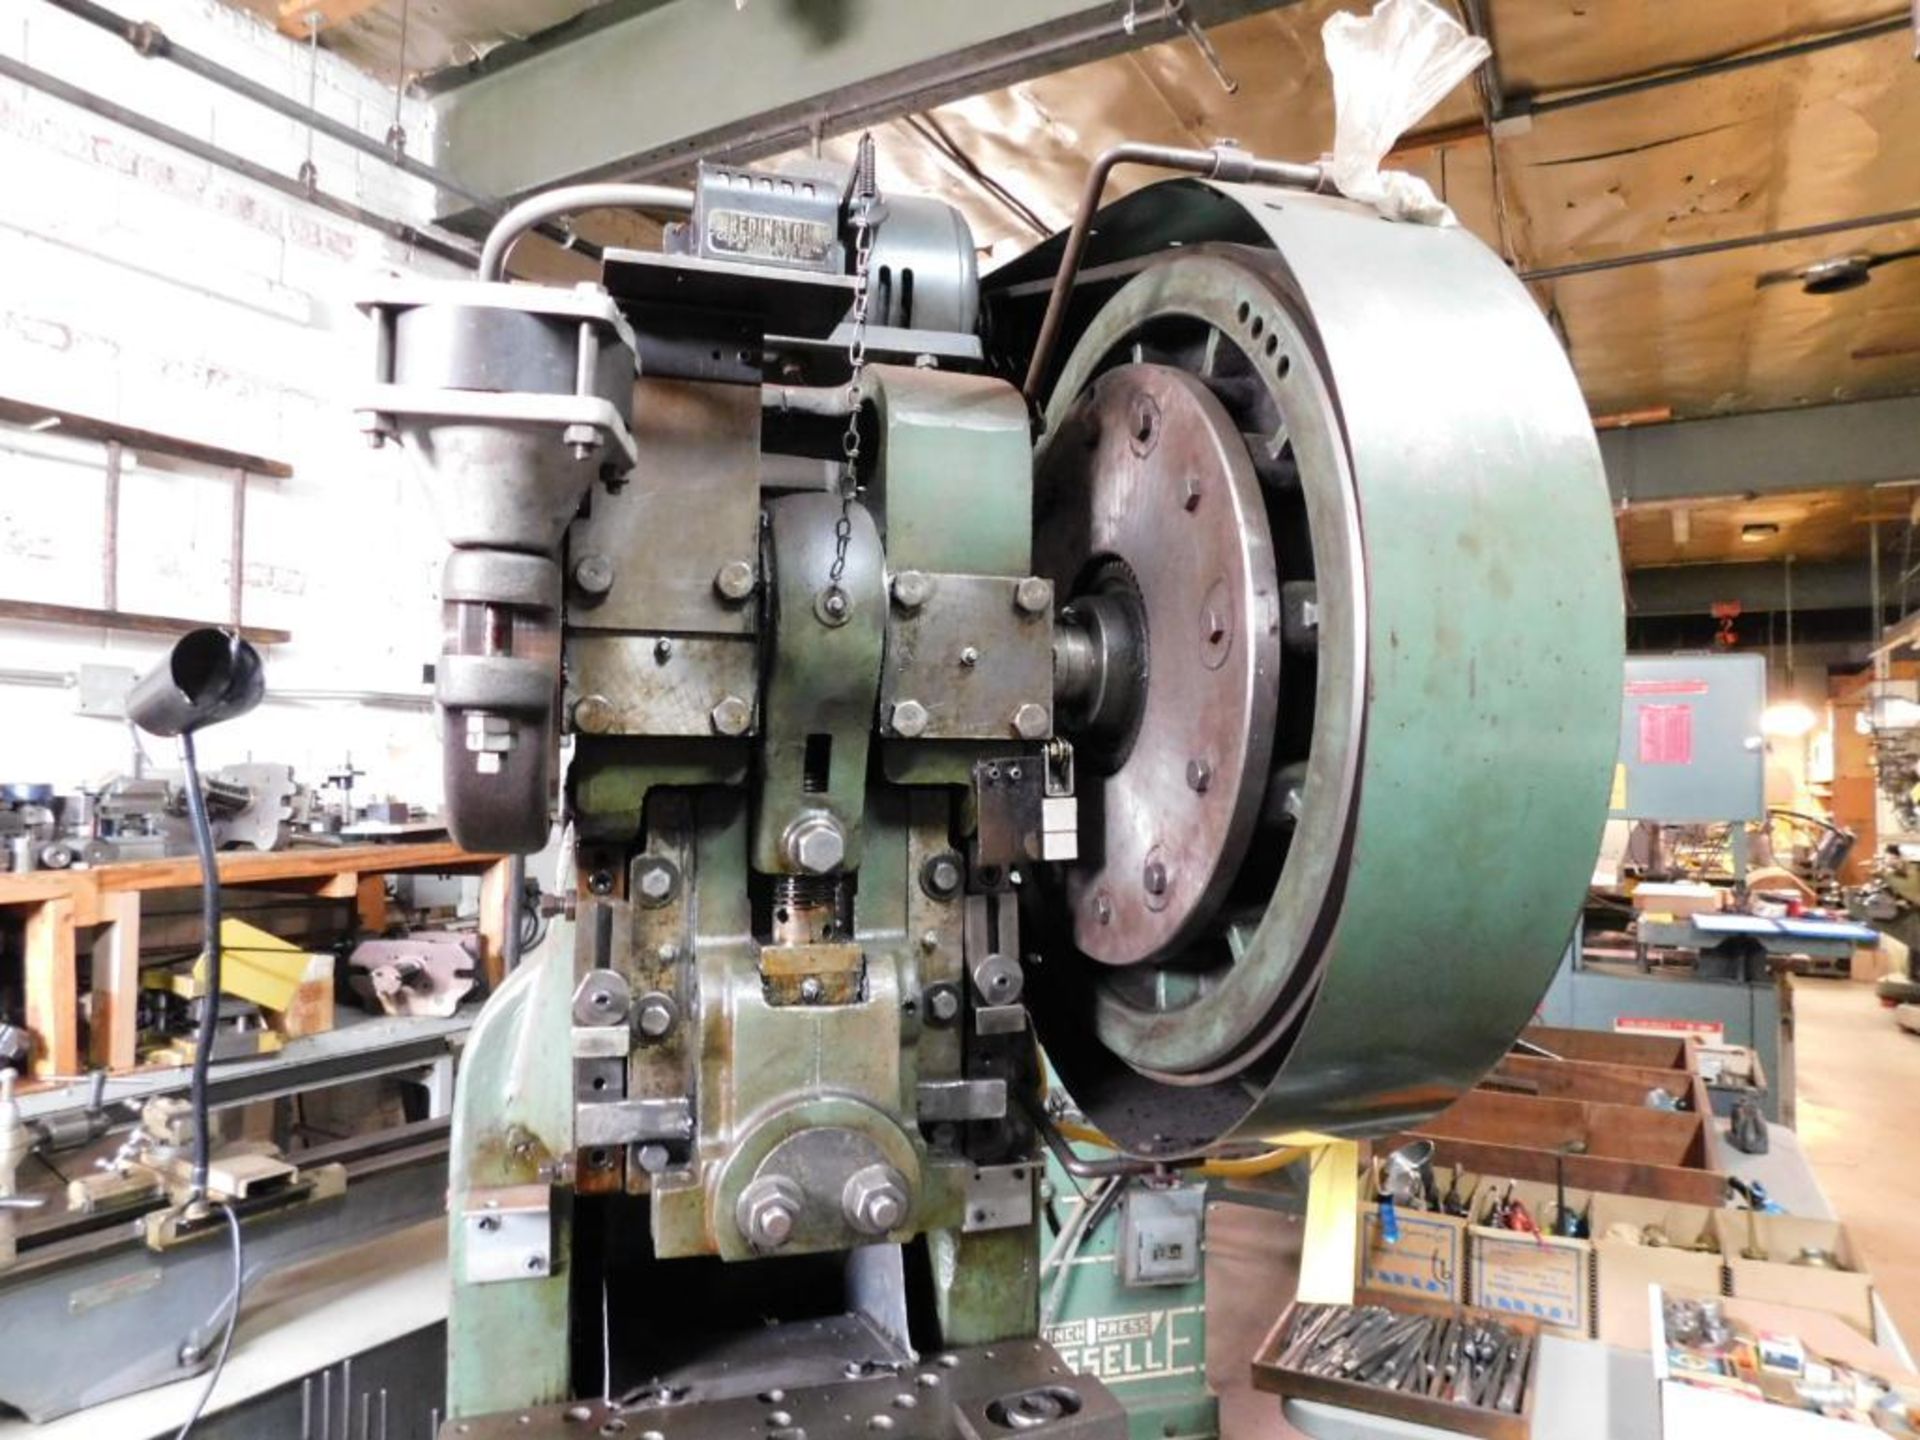 Rousselle No. 3 25-Ton OBI Air Clutch Punch Press. 2" Stroke, 7.75" Shut Height, 20"x14" Bolster Pla - Image 4 of 11